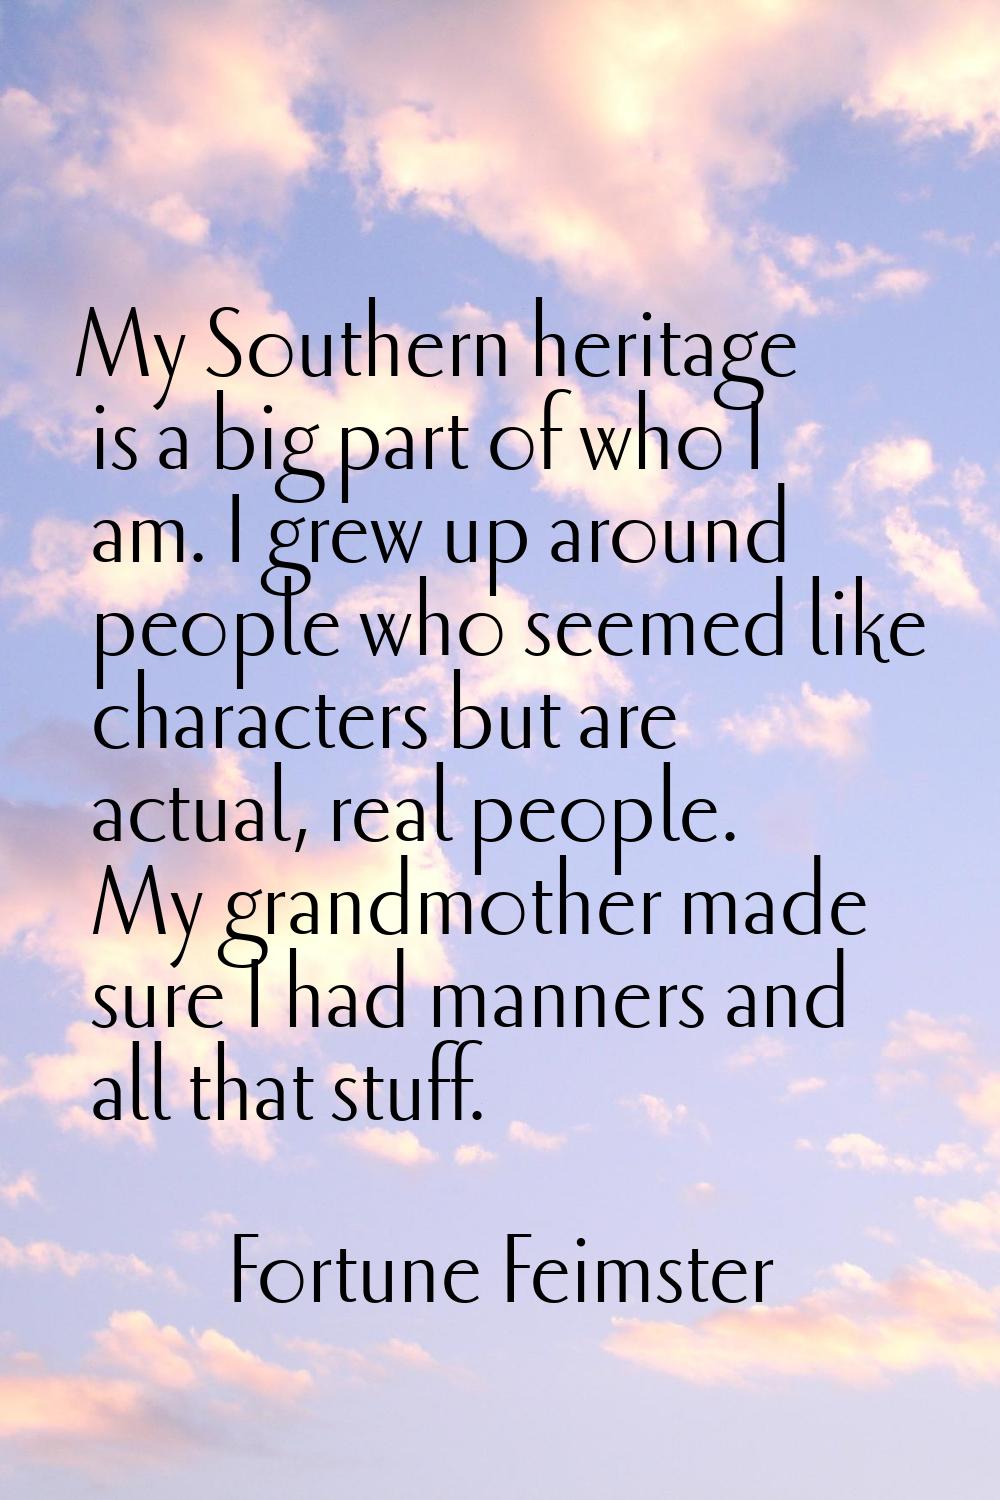 My Southern heritage is a big part of who I am. I grew up around people who seemed like characters 